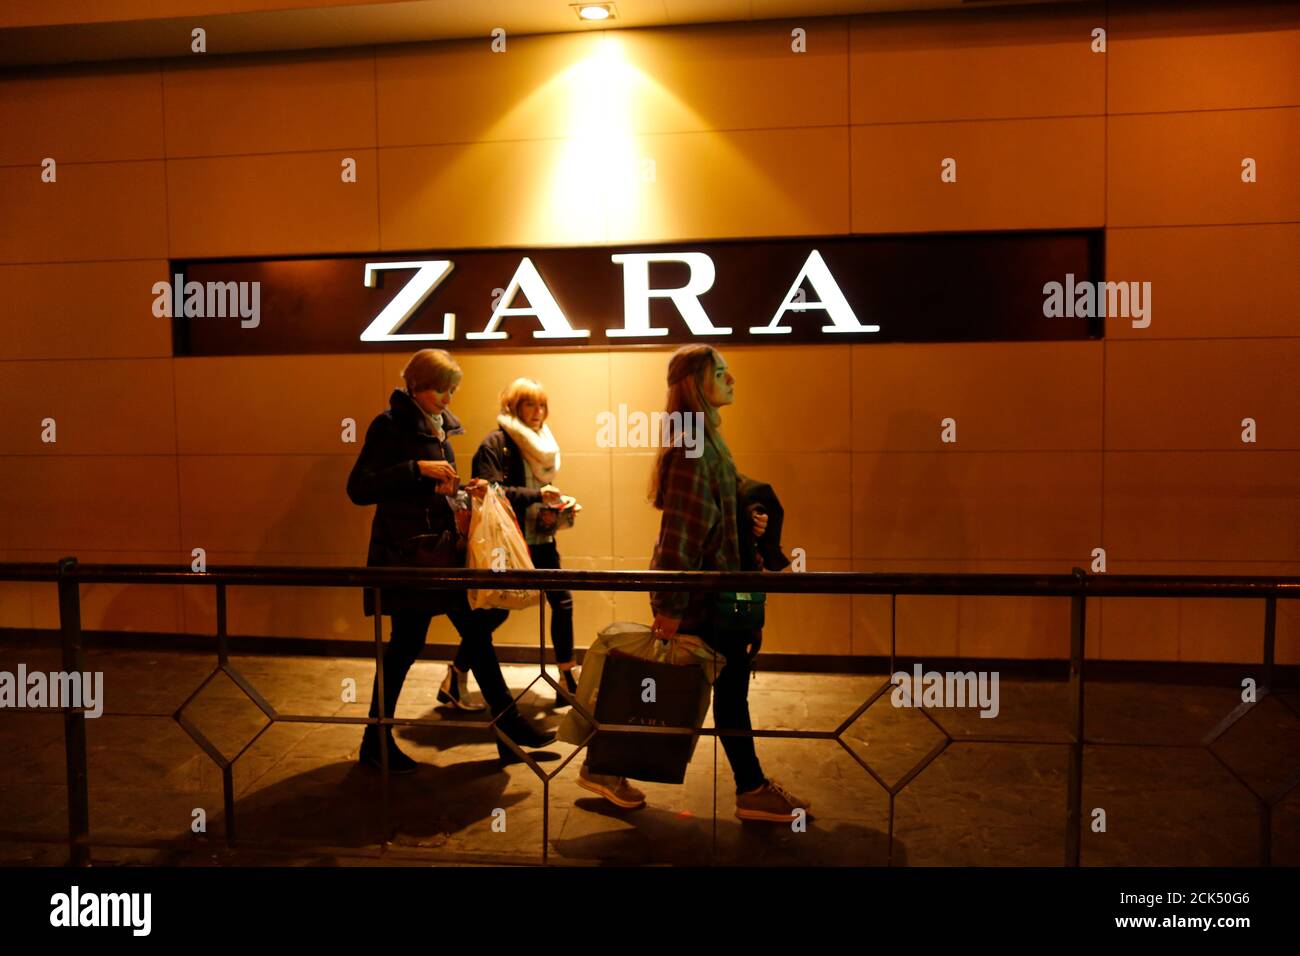 People walk past with their shopping bags a Zara logo in the Andalusian  capital of Seville, southern Spain March 4, 2016. REUTERS/Marcelo del Pozo  Stock Photo - Alamy